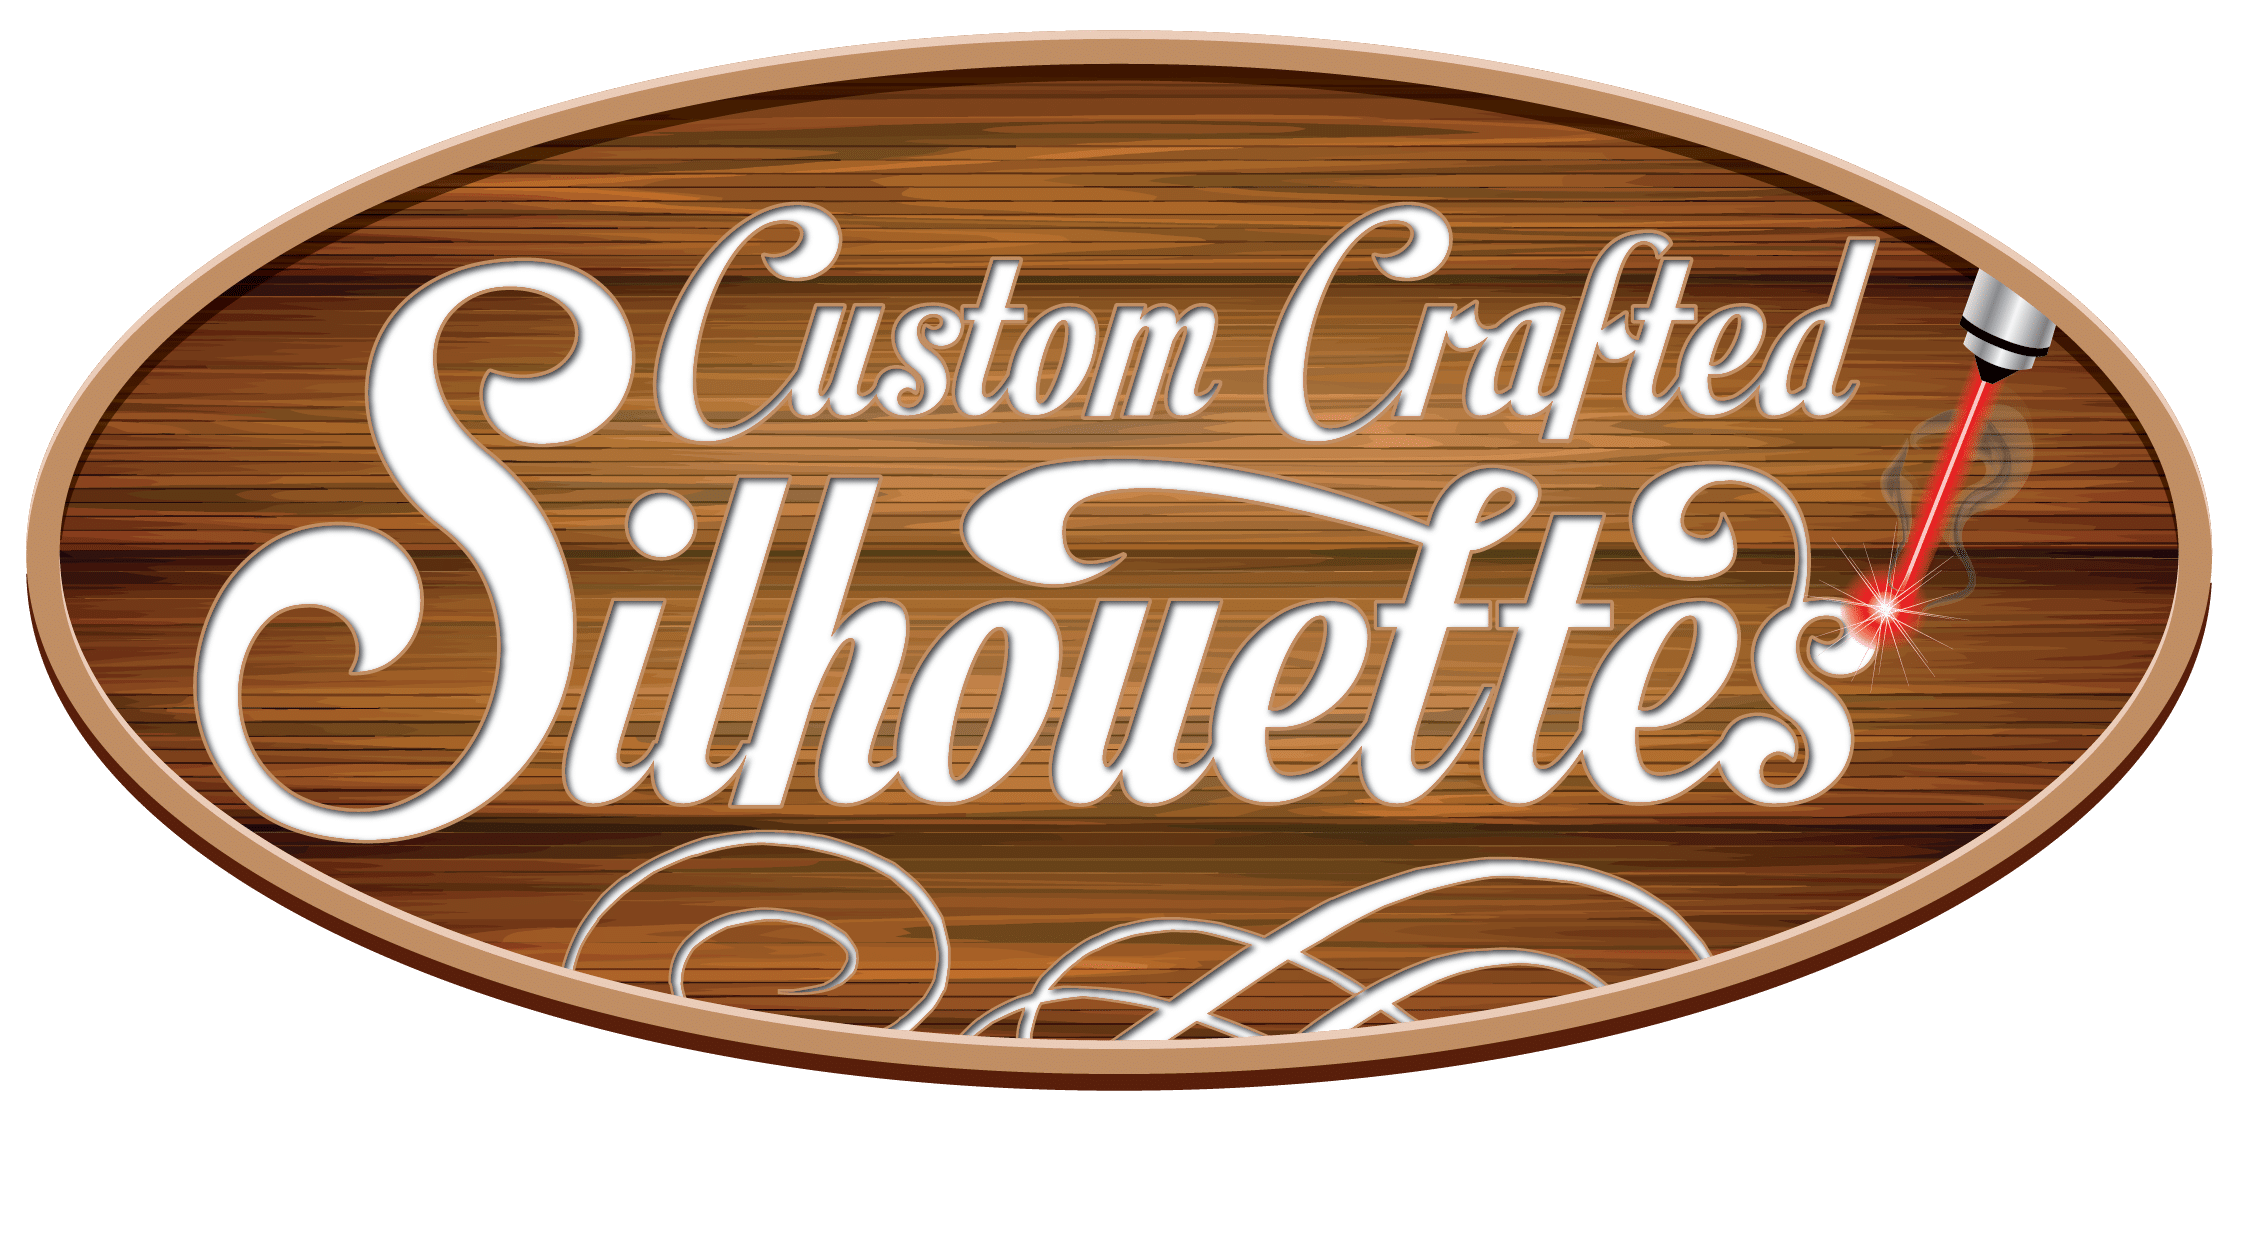 Custom Crafted Silhouettes Logo